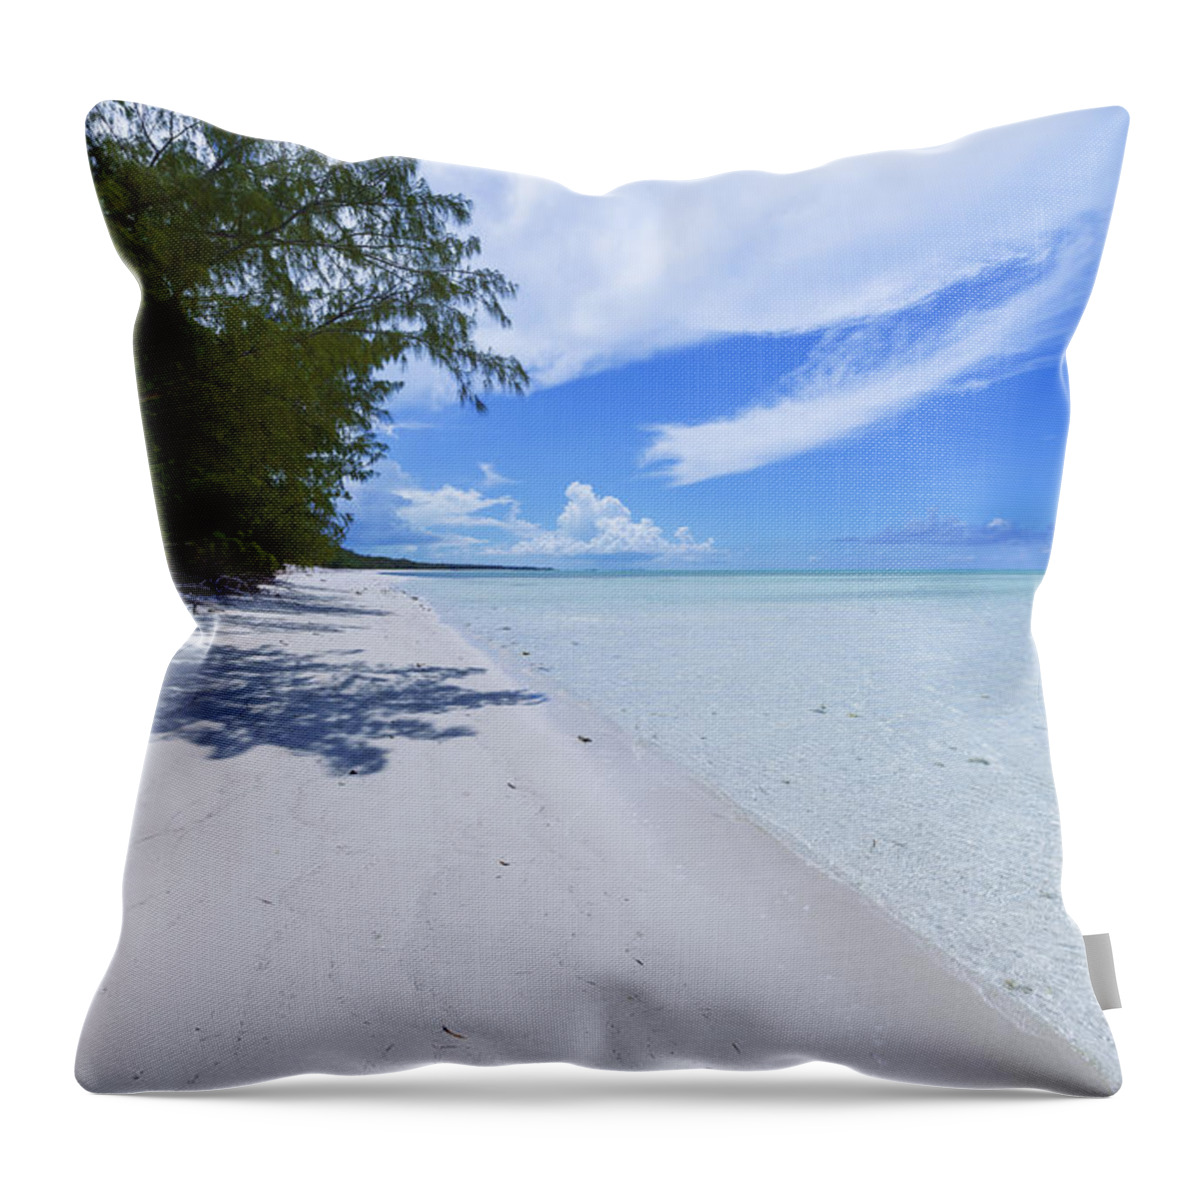 Caribbean Throw Pillow featuring the photograph Tranquility by Chad Dutson